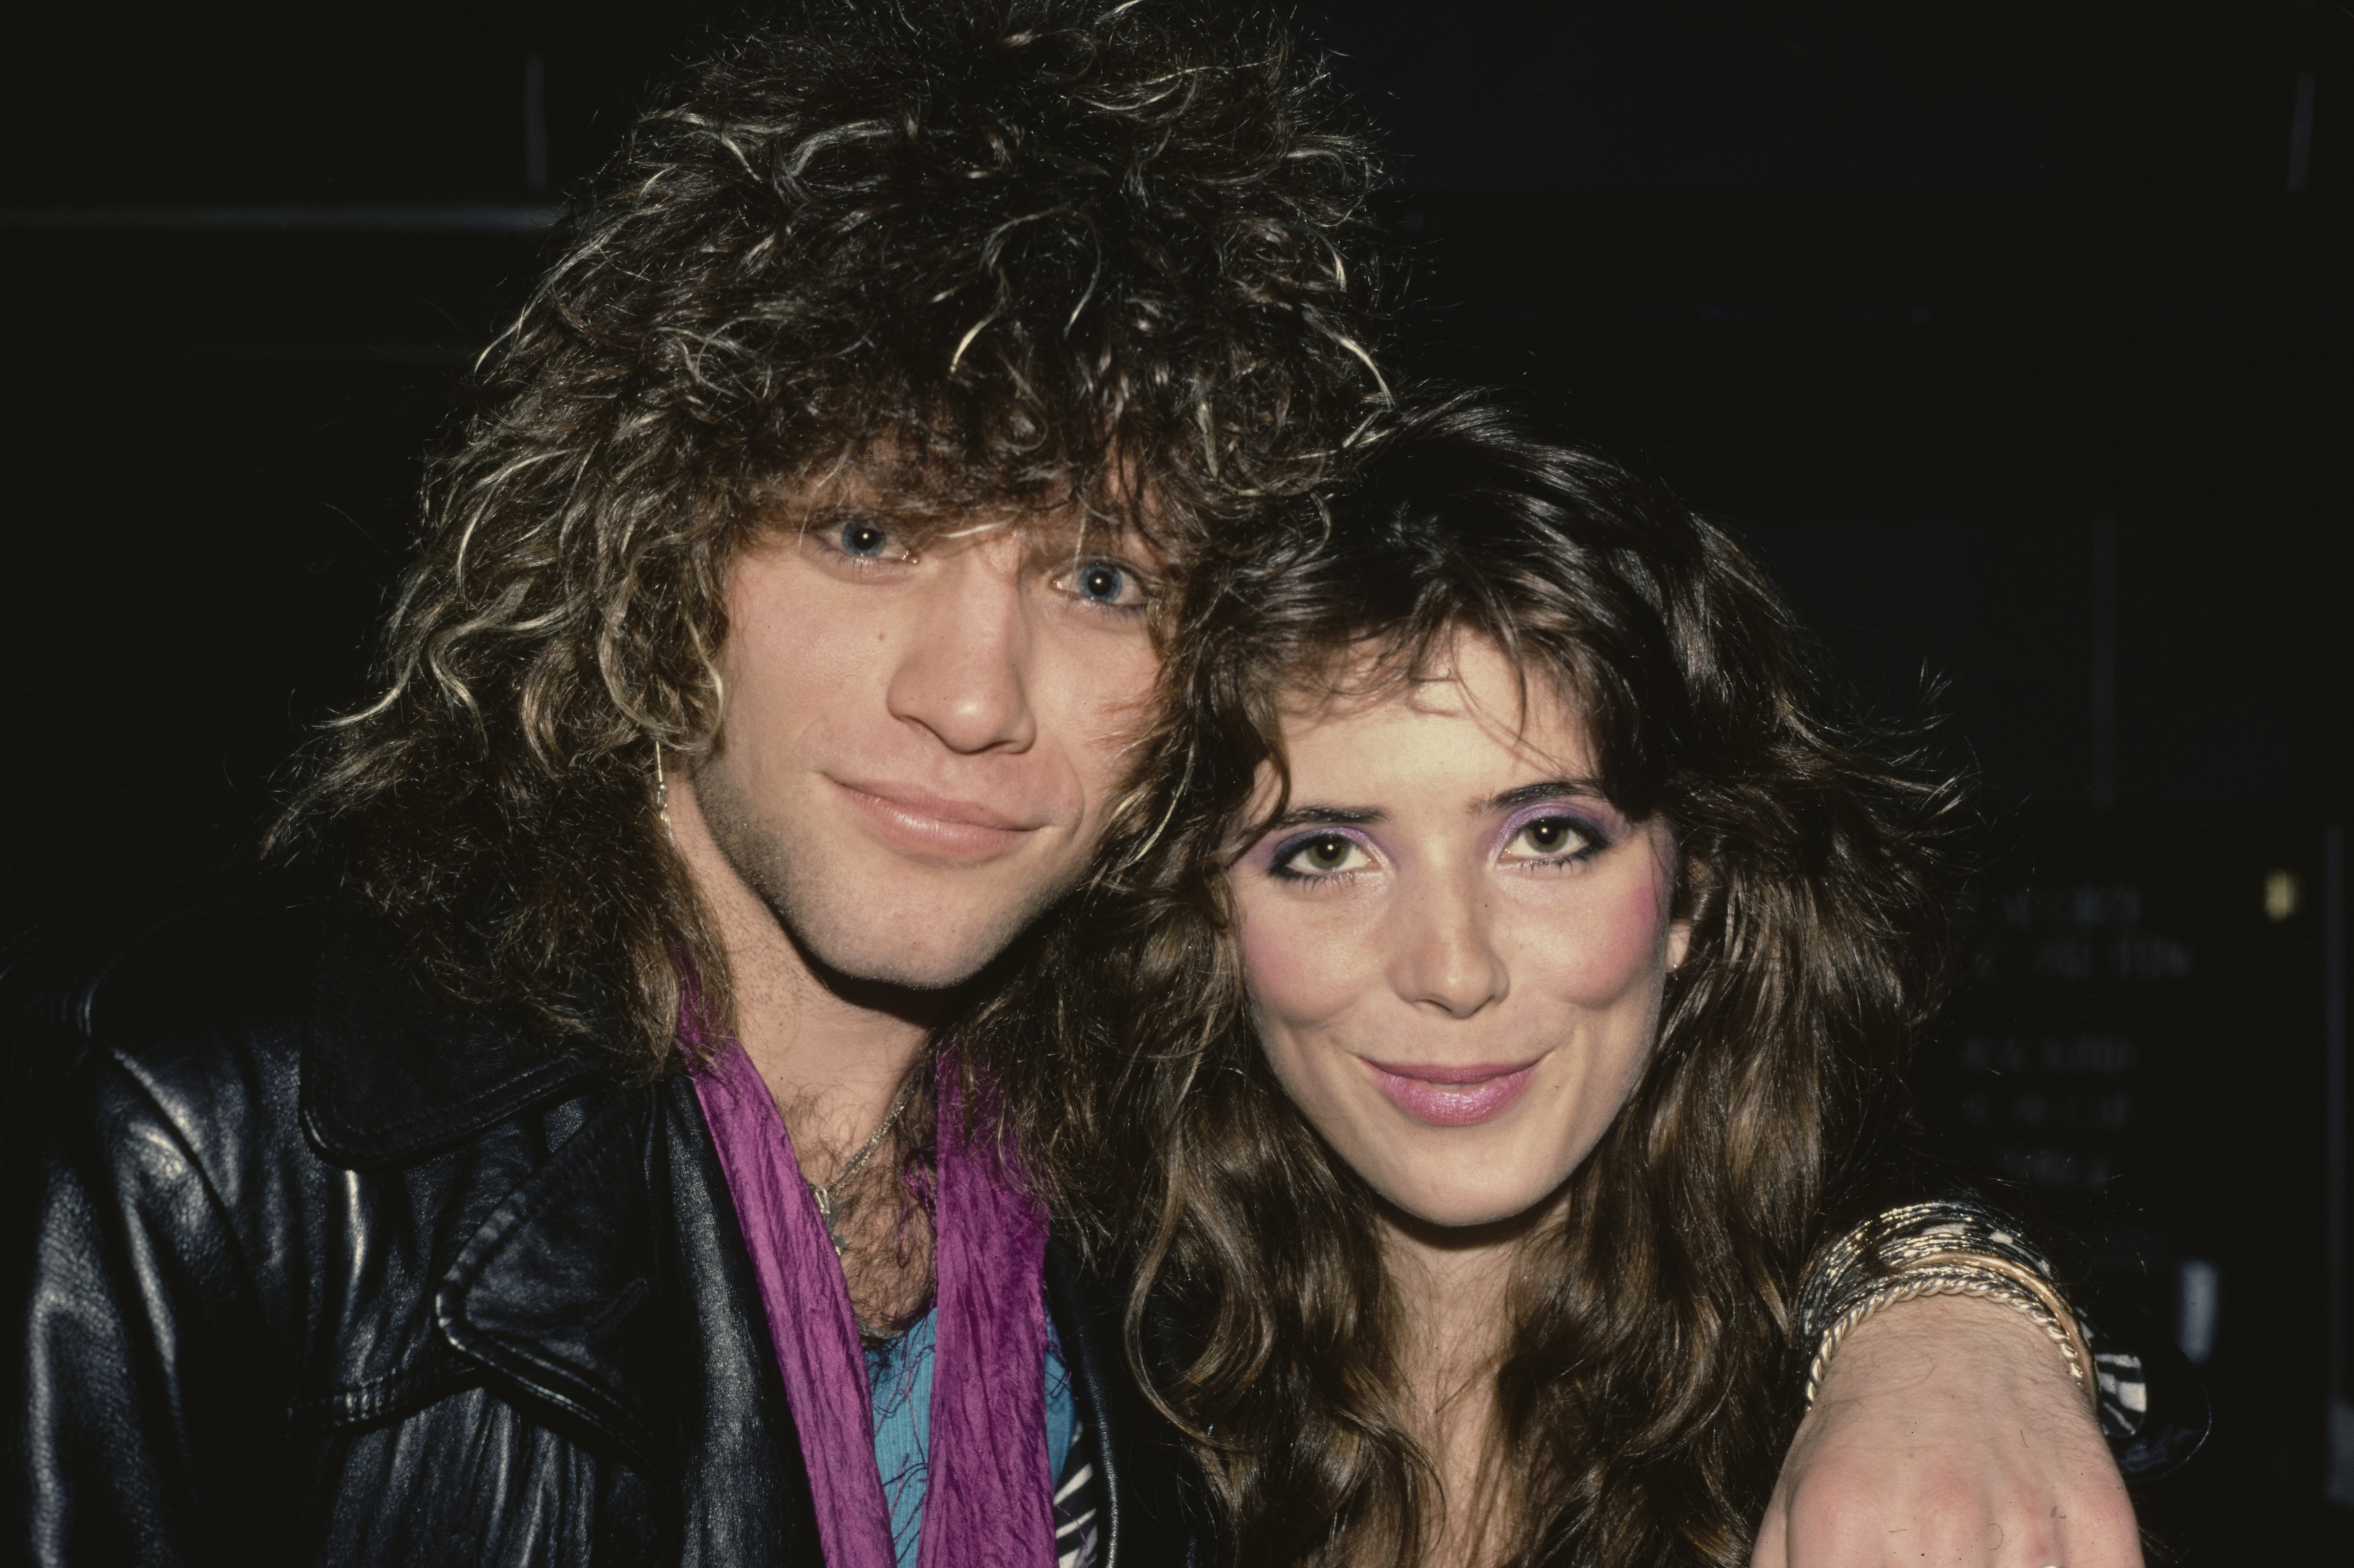 Jon Bon Jovi and Dorothea Hurley in Los Angeles, California, March 1985. | Source: Getty Images